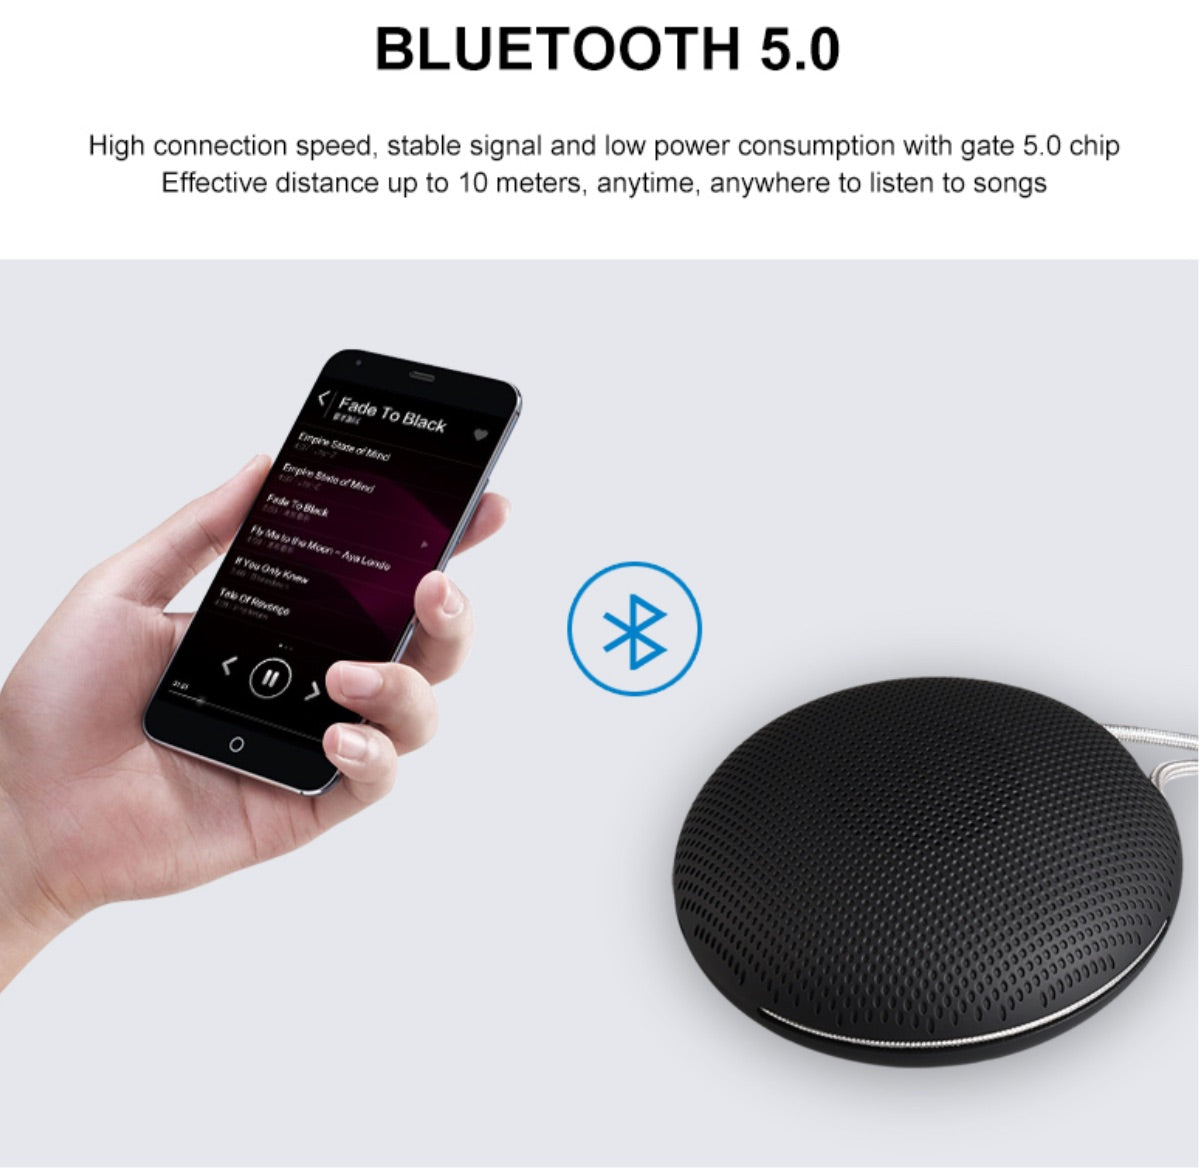 Bluetooth F5 Speaker with Handstrap - CHT Electronics